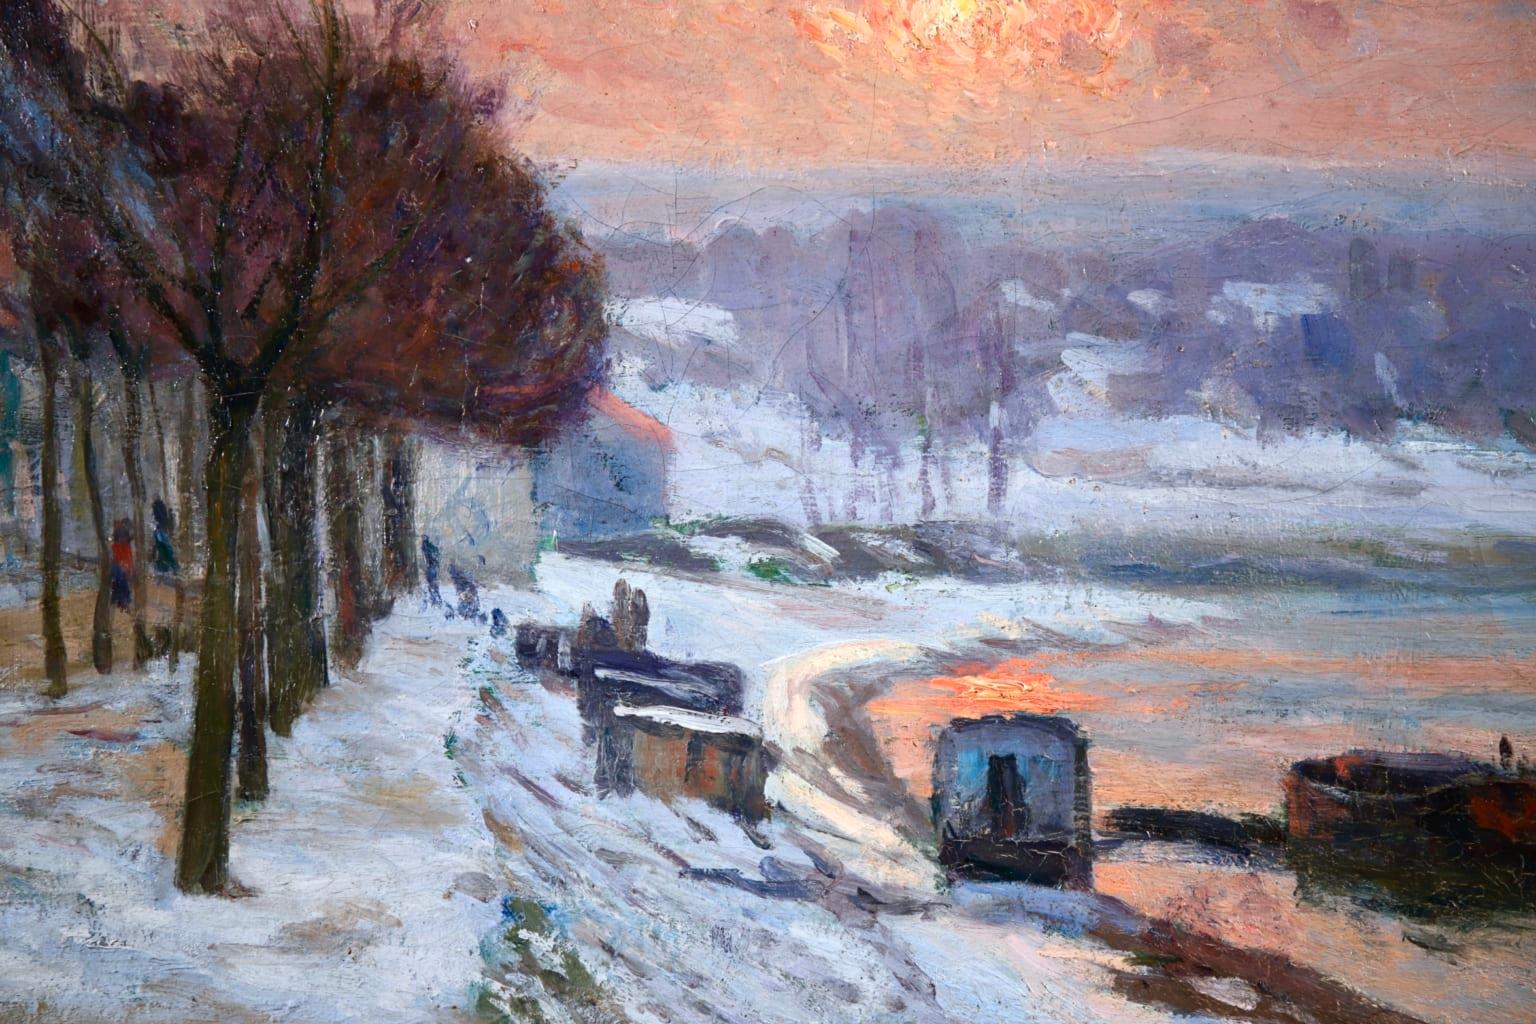 Snow on the Seine - Impressionist Winter River Landscape by Armand Guillaumin - Gray Landscape Painting by Jean Baptiste-Armand Guillaumin